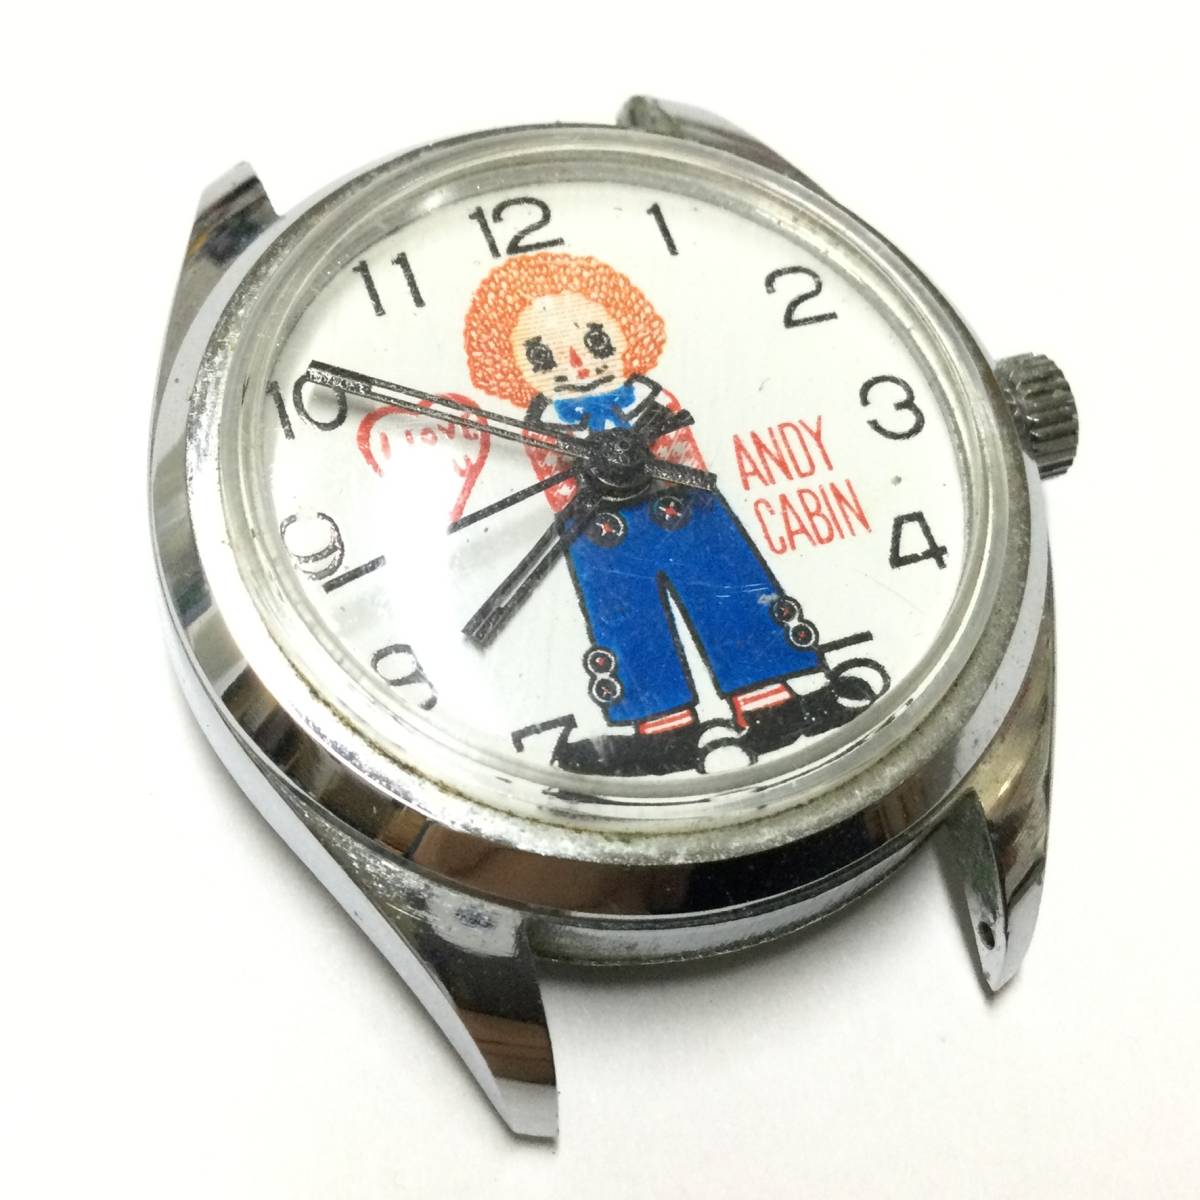 [ Showa Retro * rare Vintage ] that time thing ANDY CABIN wristwatch Junk 